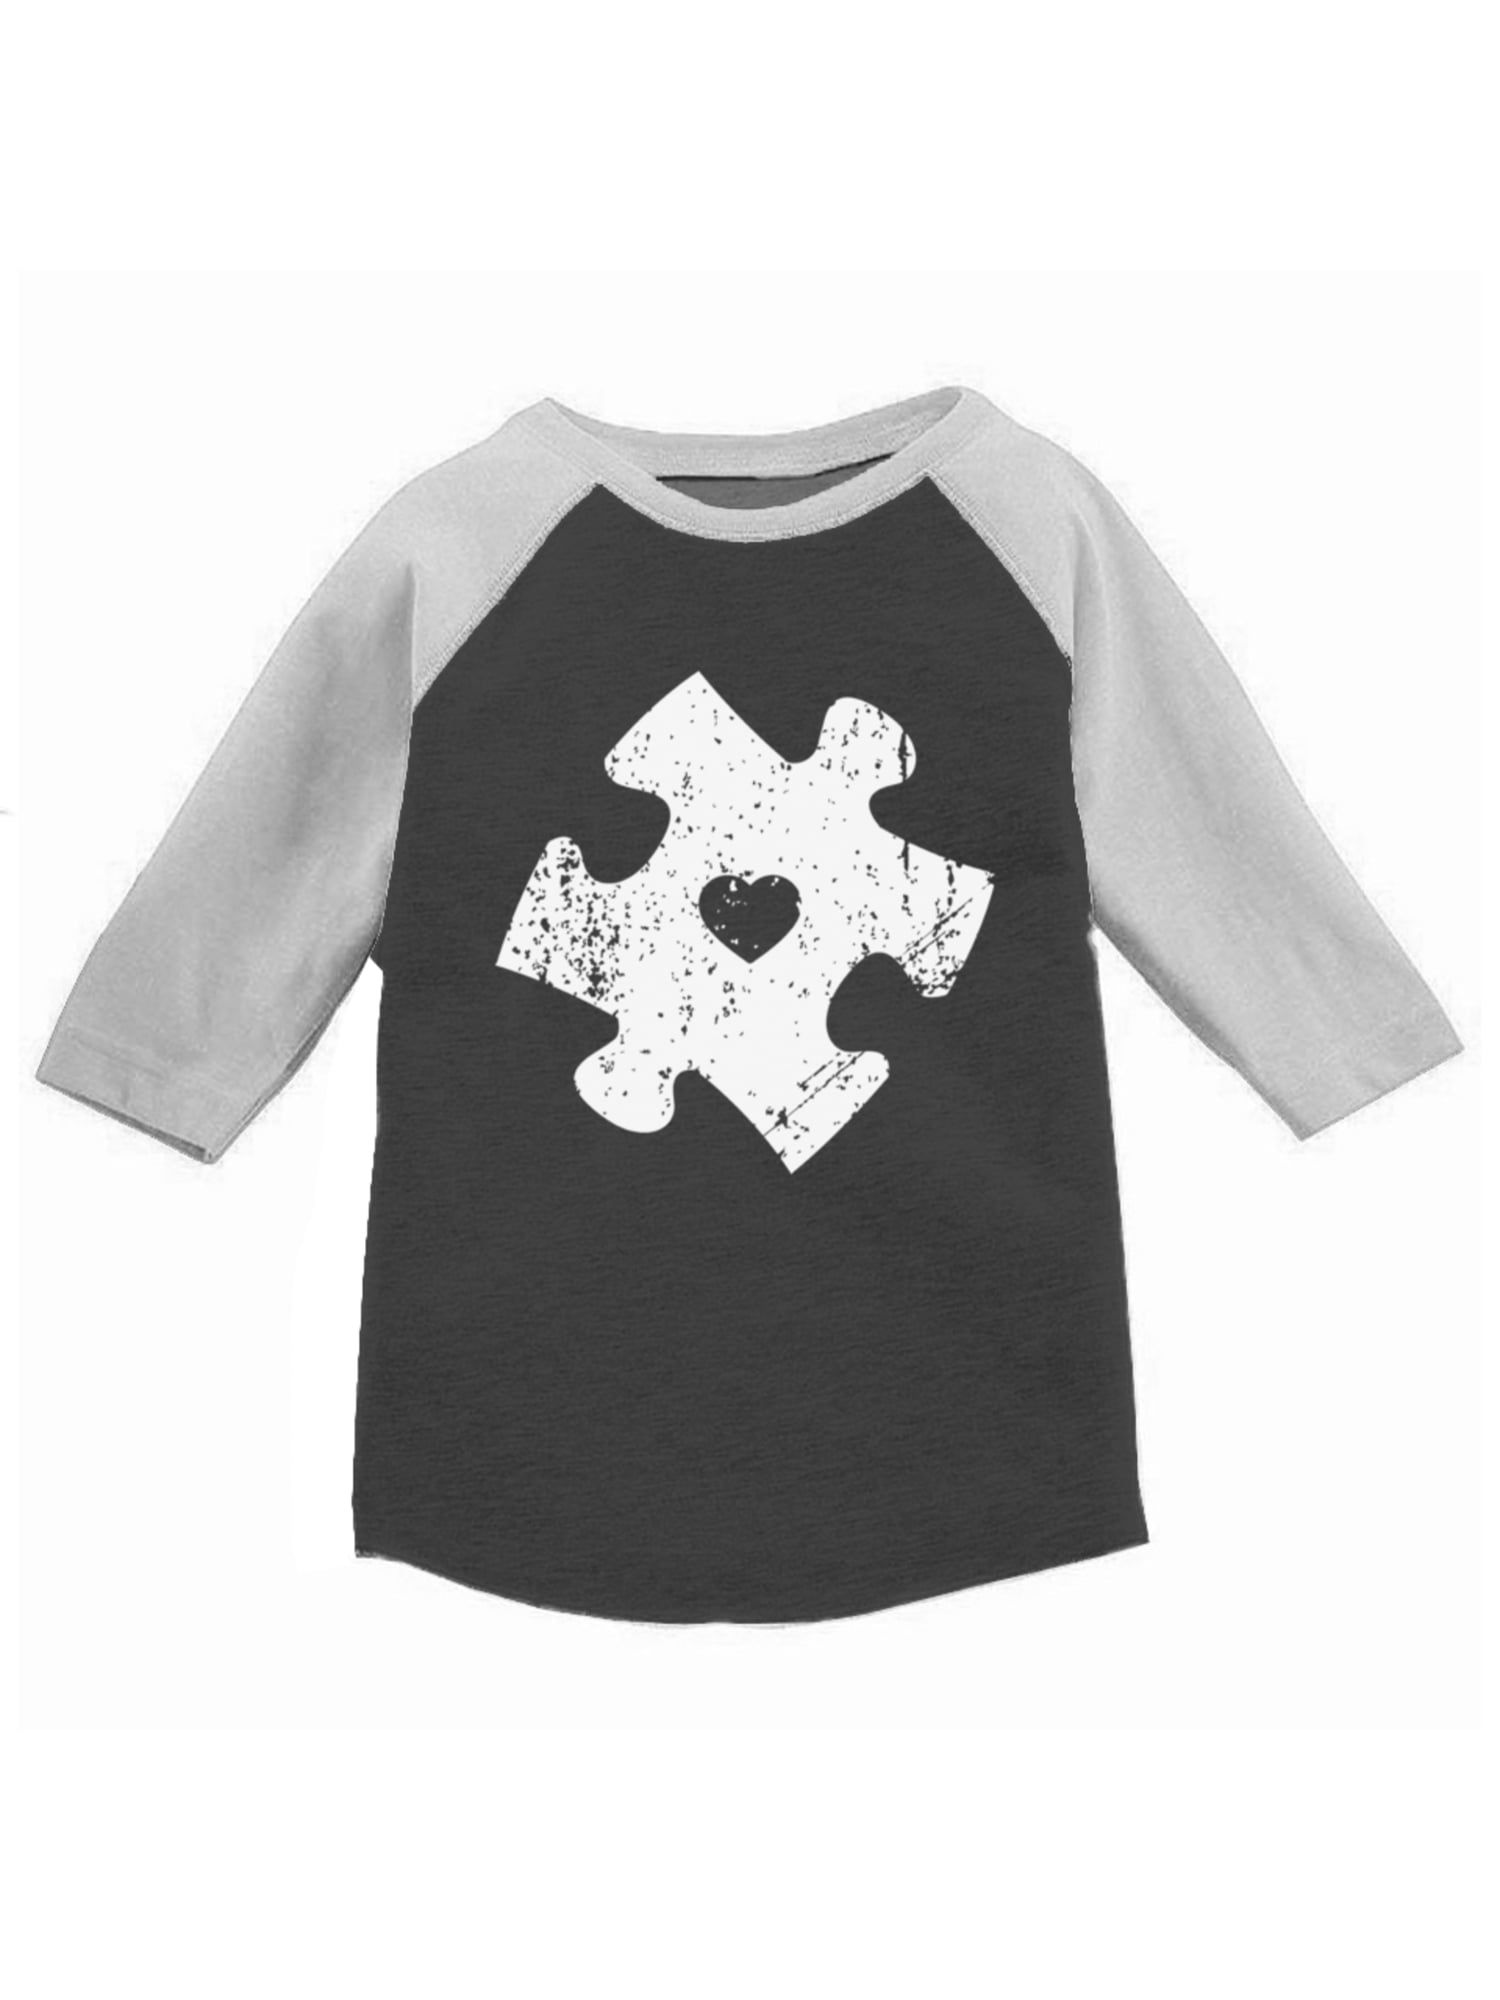 jersey shirts for kids